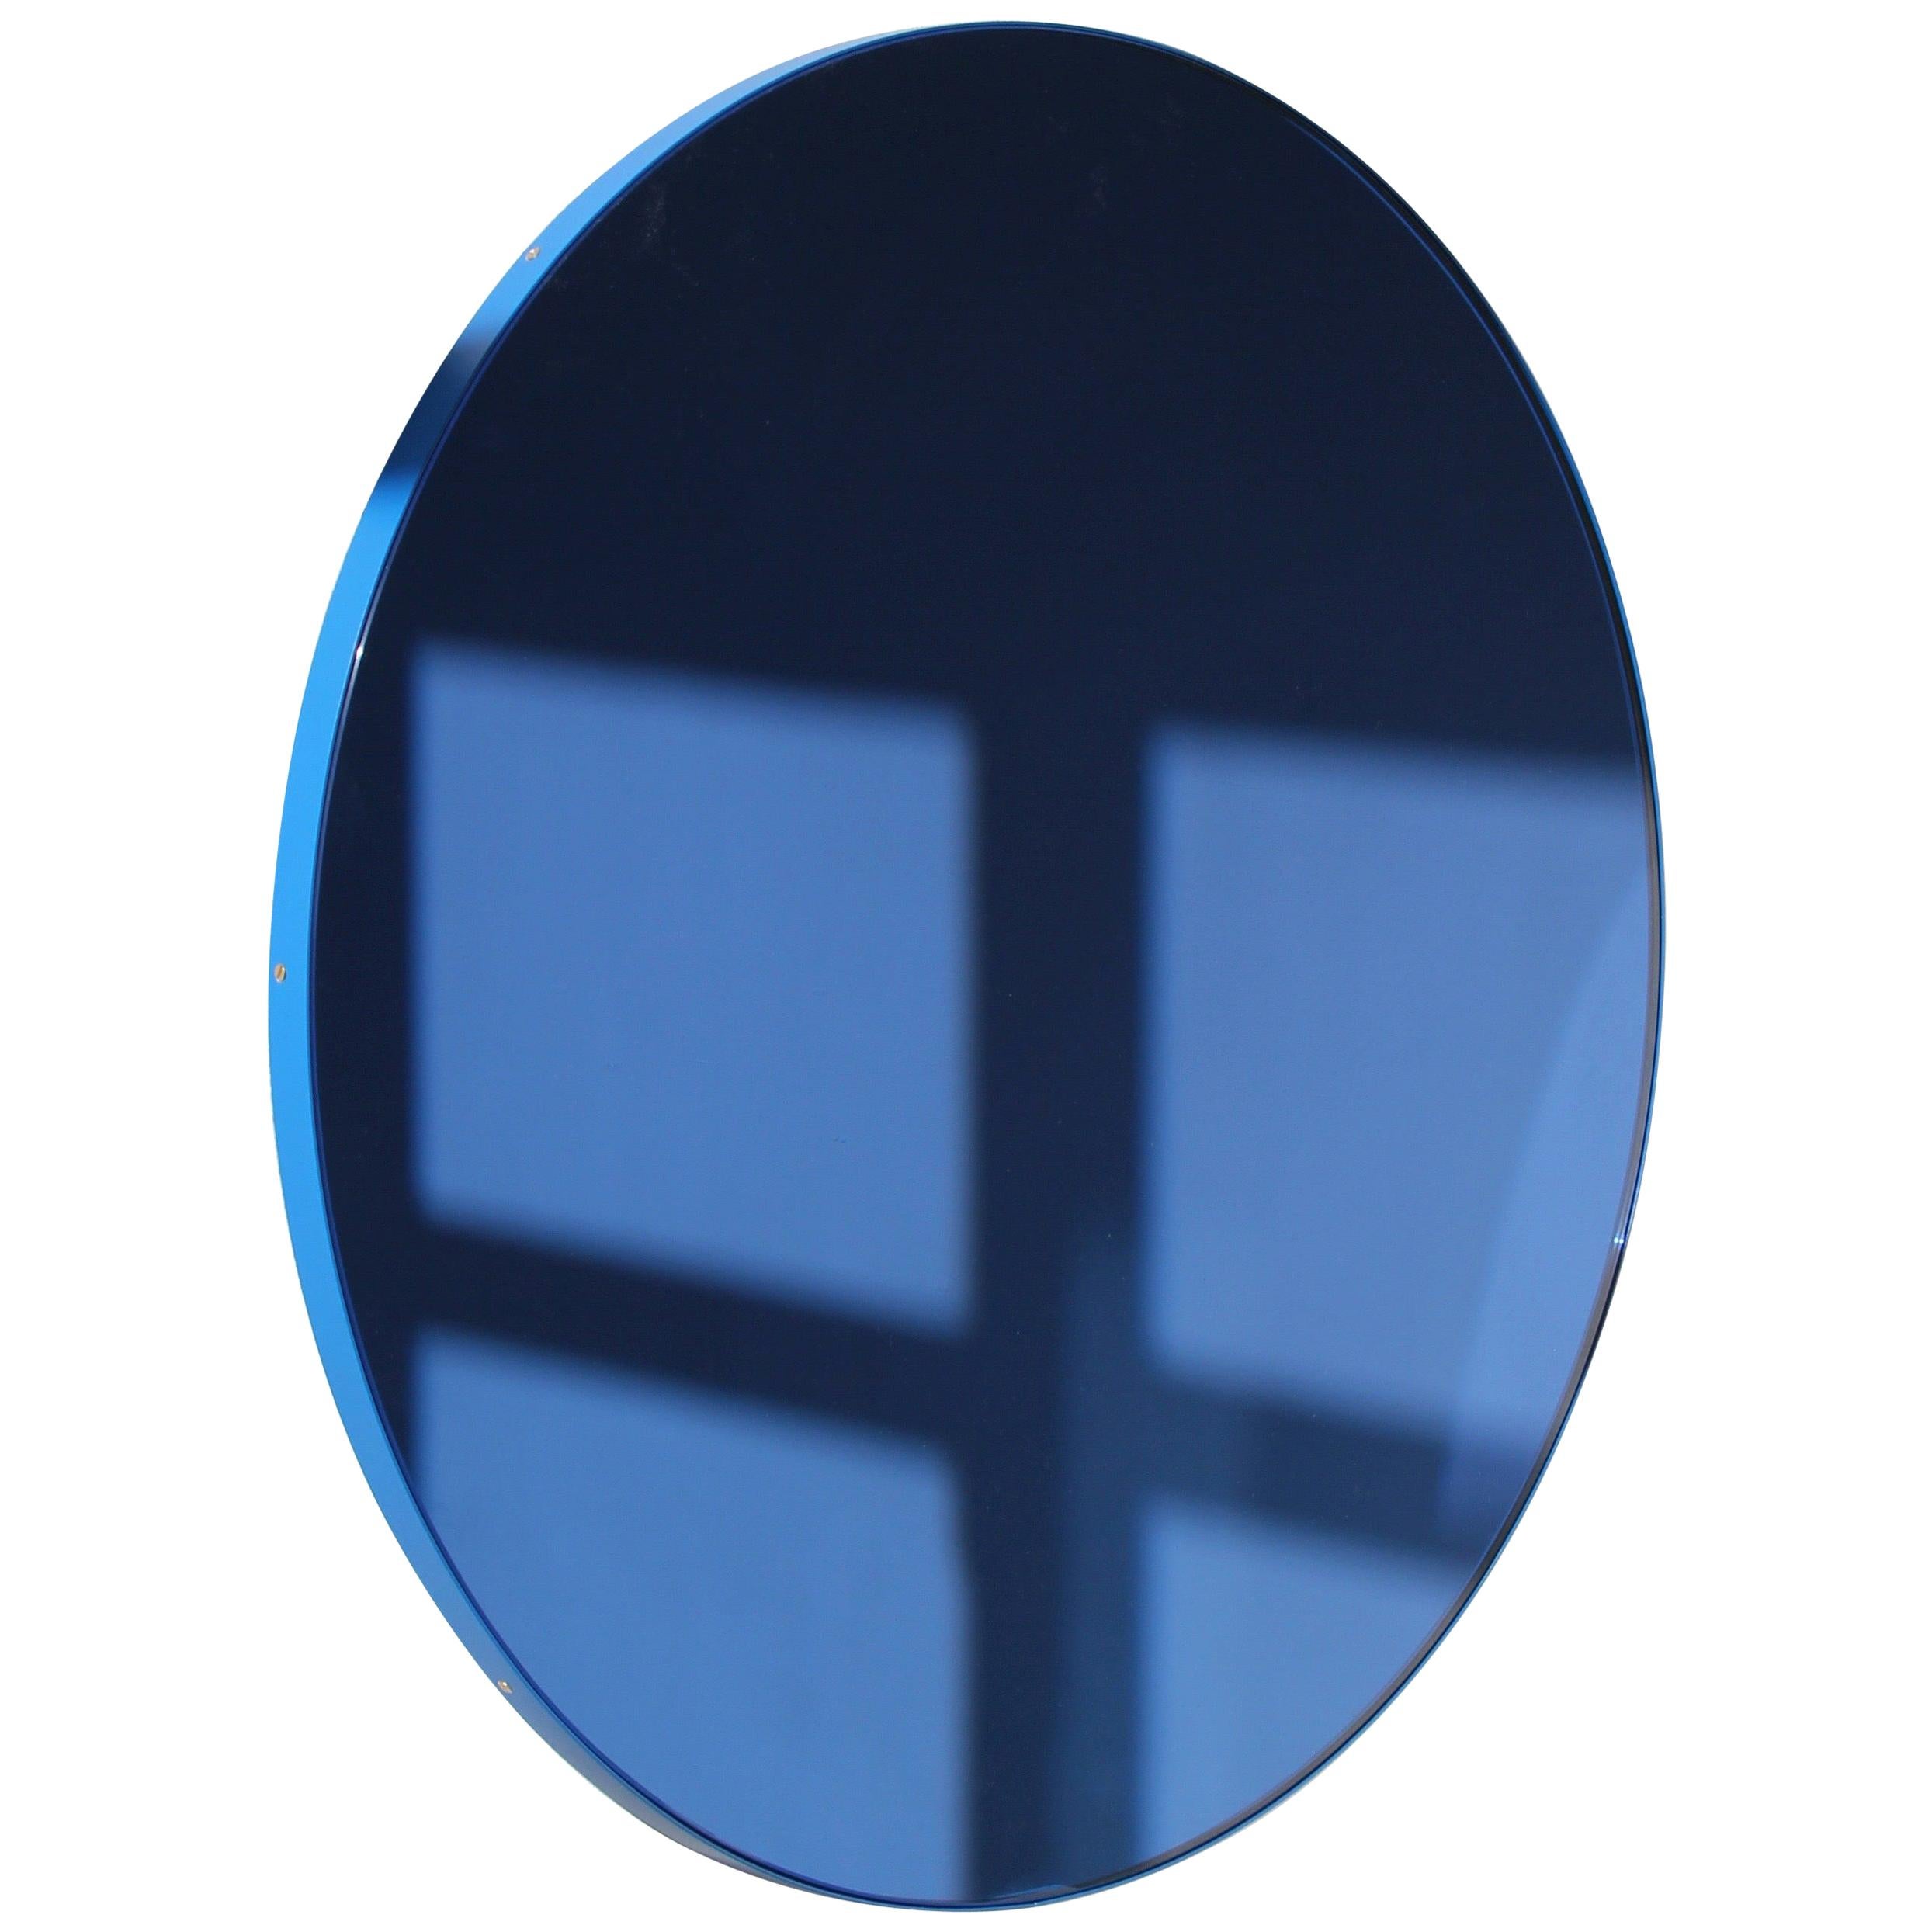 Orbis Round Blue Tinted Contemporary Mirror with Blue Frame, Regular